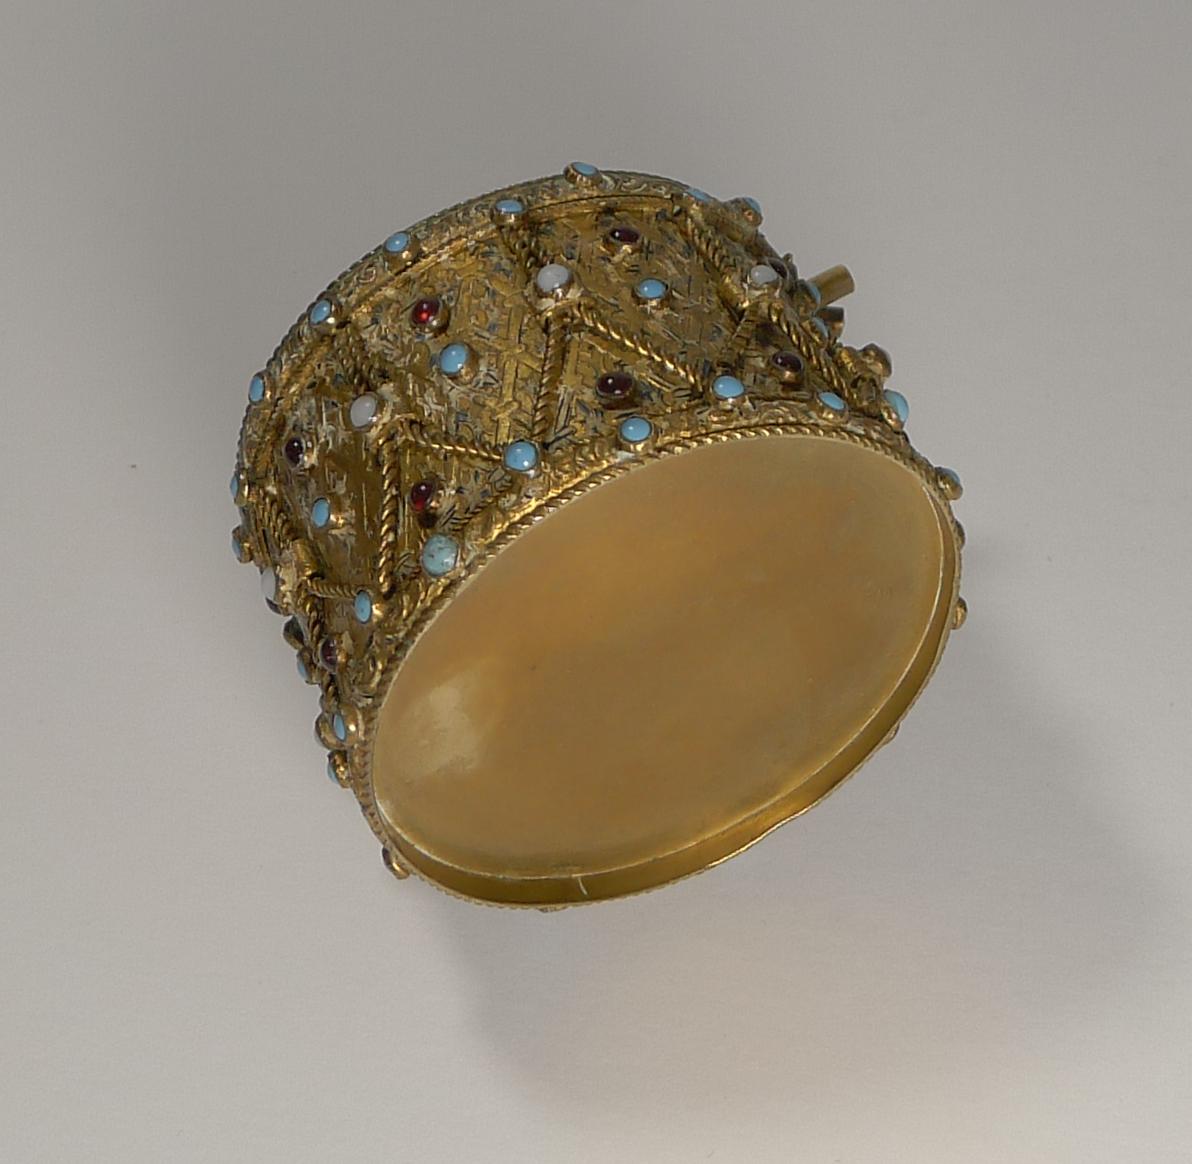 A most unusual late 19th century novelty box in the form of a drum made from gilded brass inset with a selection of faux cabochon Turquoise, Opals and Garnets.

The handles of the two drumsticks drape over the side of the drum and with the thumb